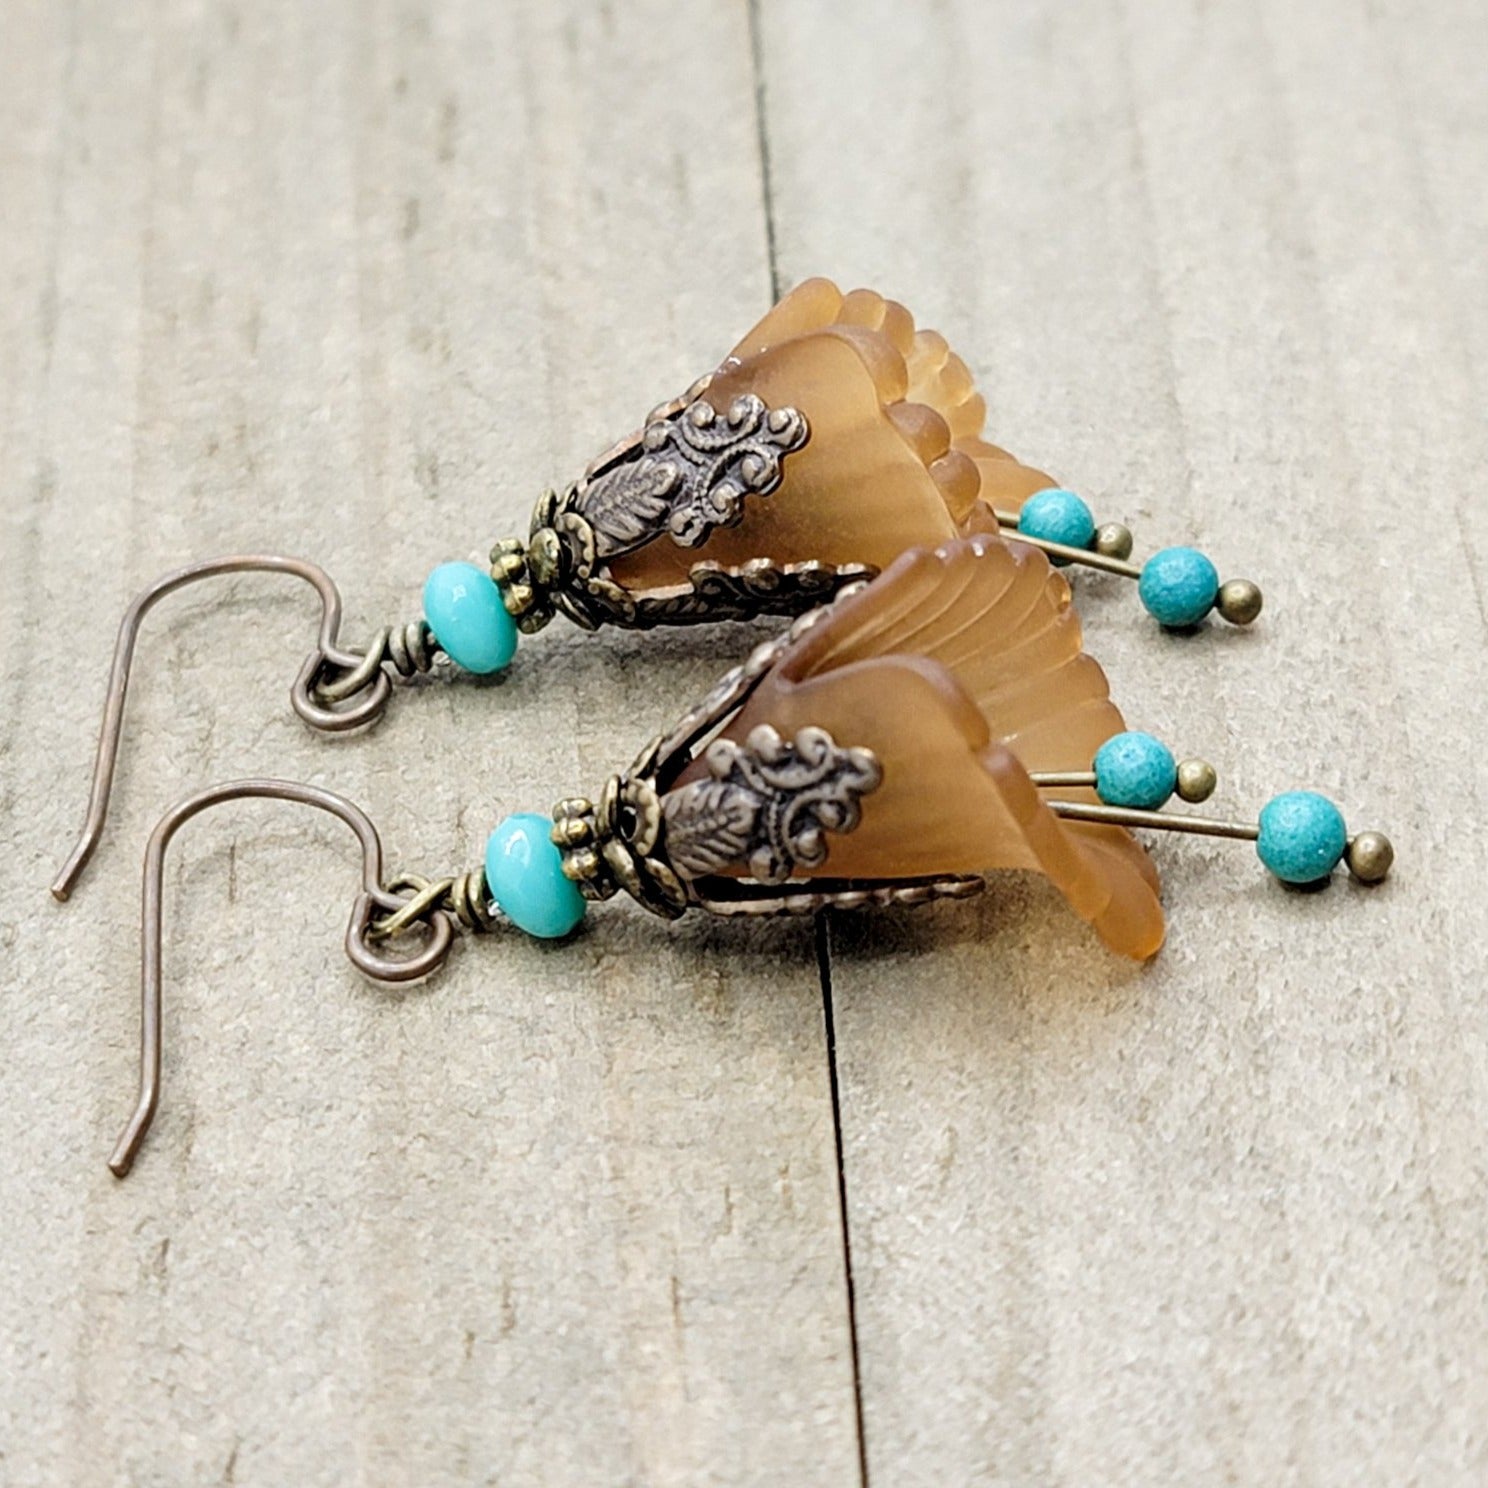 Vintage Style Lucite Flower Earrings-Brown and Turquoise - Nicki Lynn Jewelry